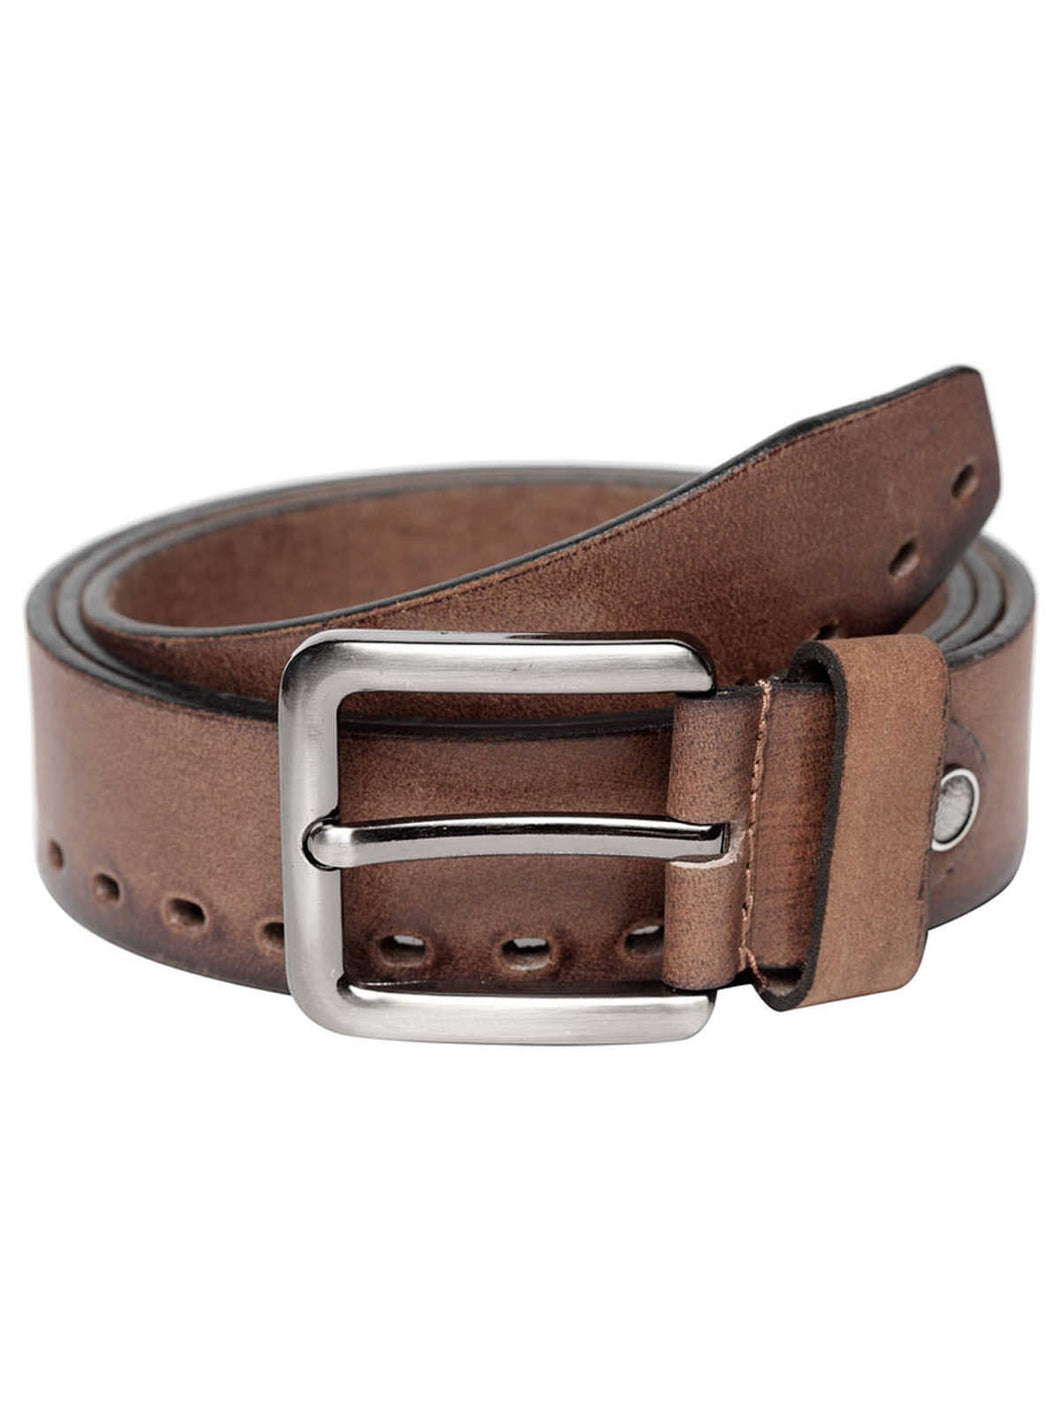 Teakwood Genuine Leather Tan Solid Belt with Cut-Outs